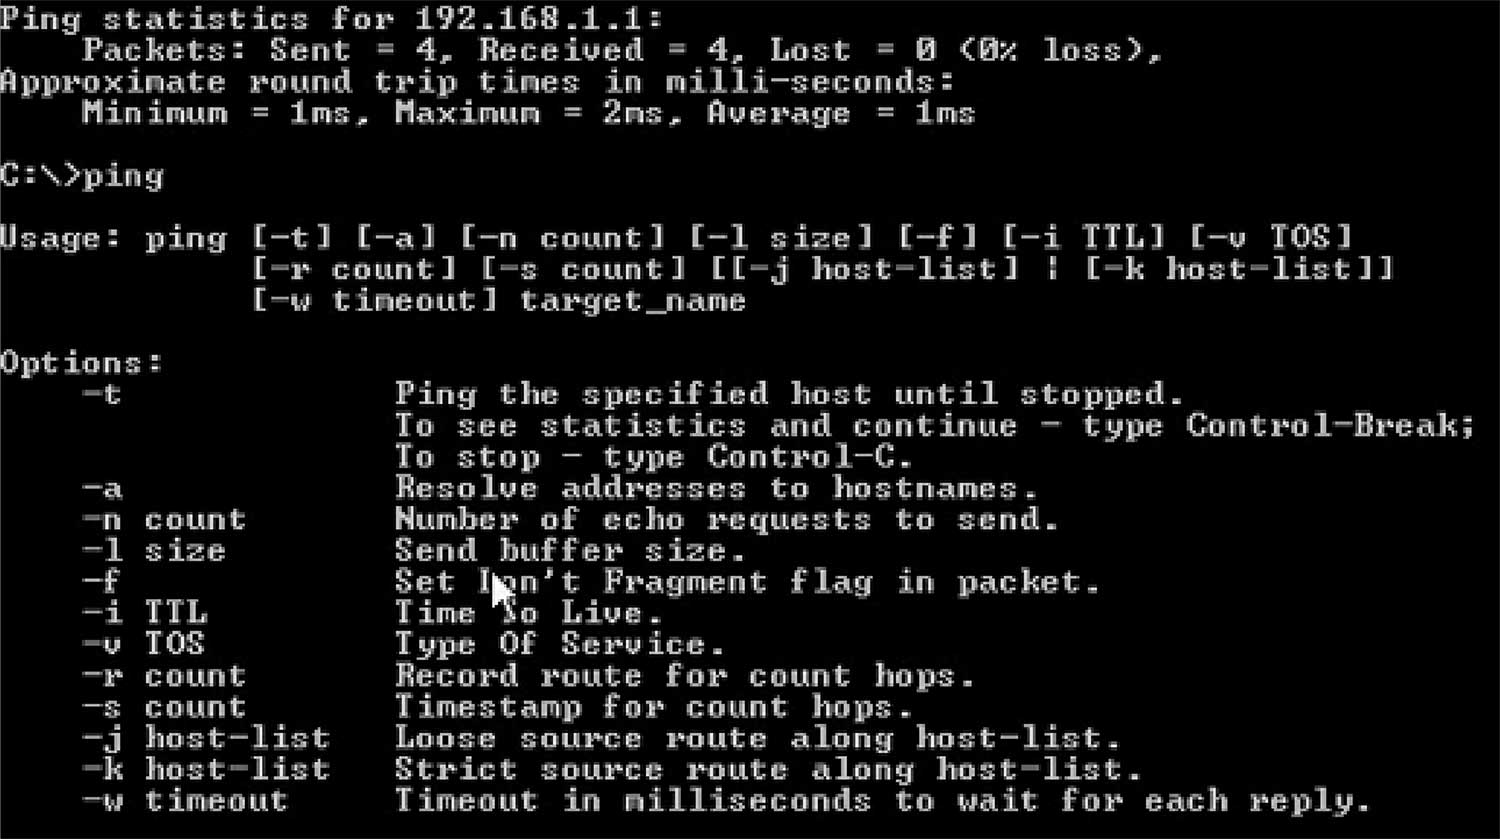 Your ping. Команды MS dos. Таблица команд MS dos. MS‑dos 1.0 команды.